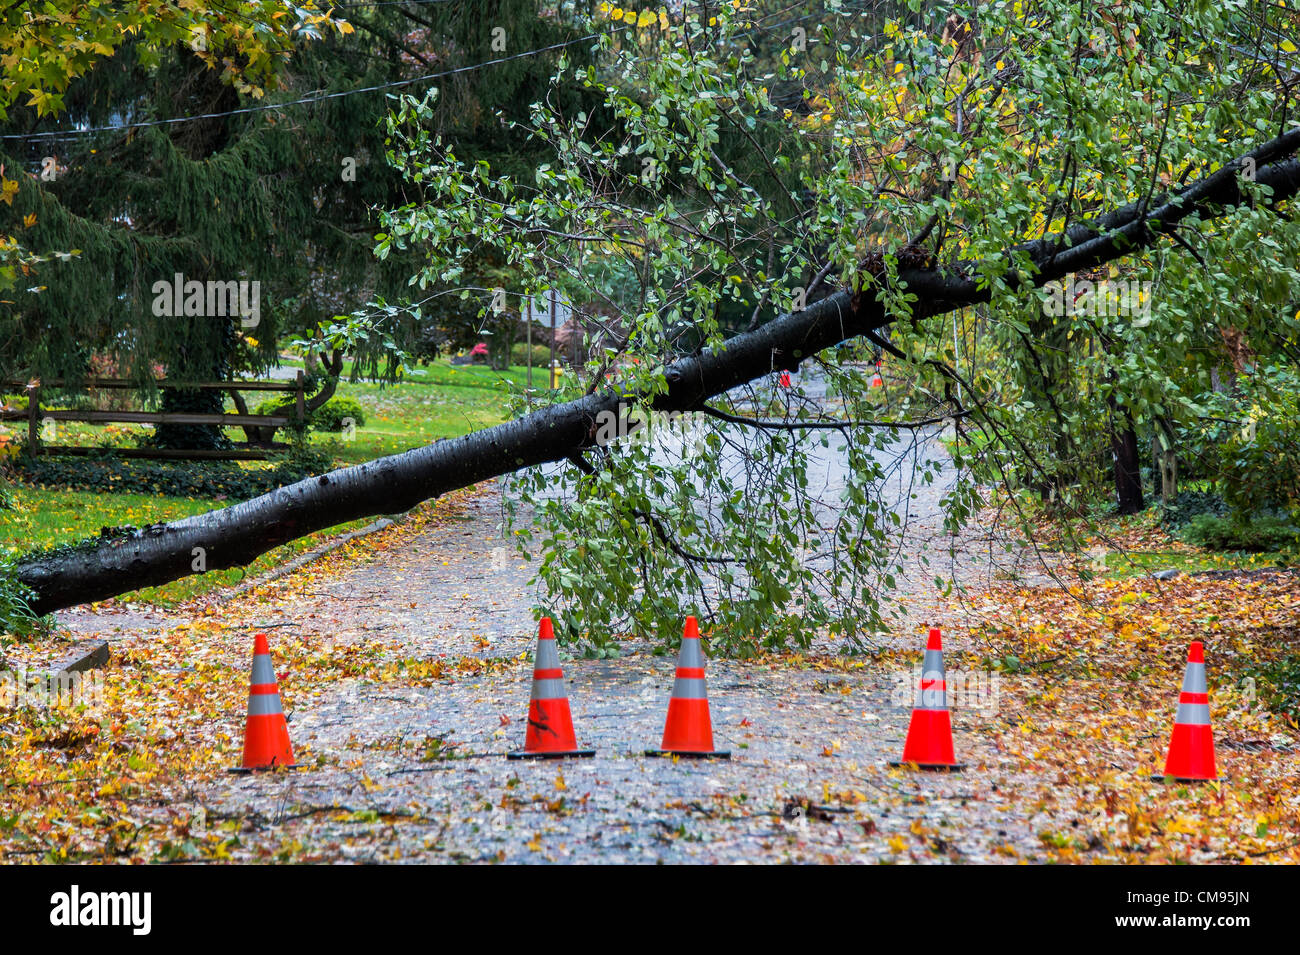 New Jersey, USA. 30th October 2012. Hurricane Sandy tree and power line damage, Moorestown, New Jersey, USA Stock Photo